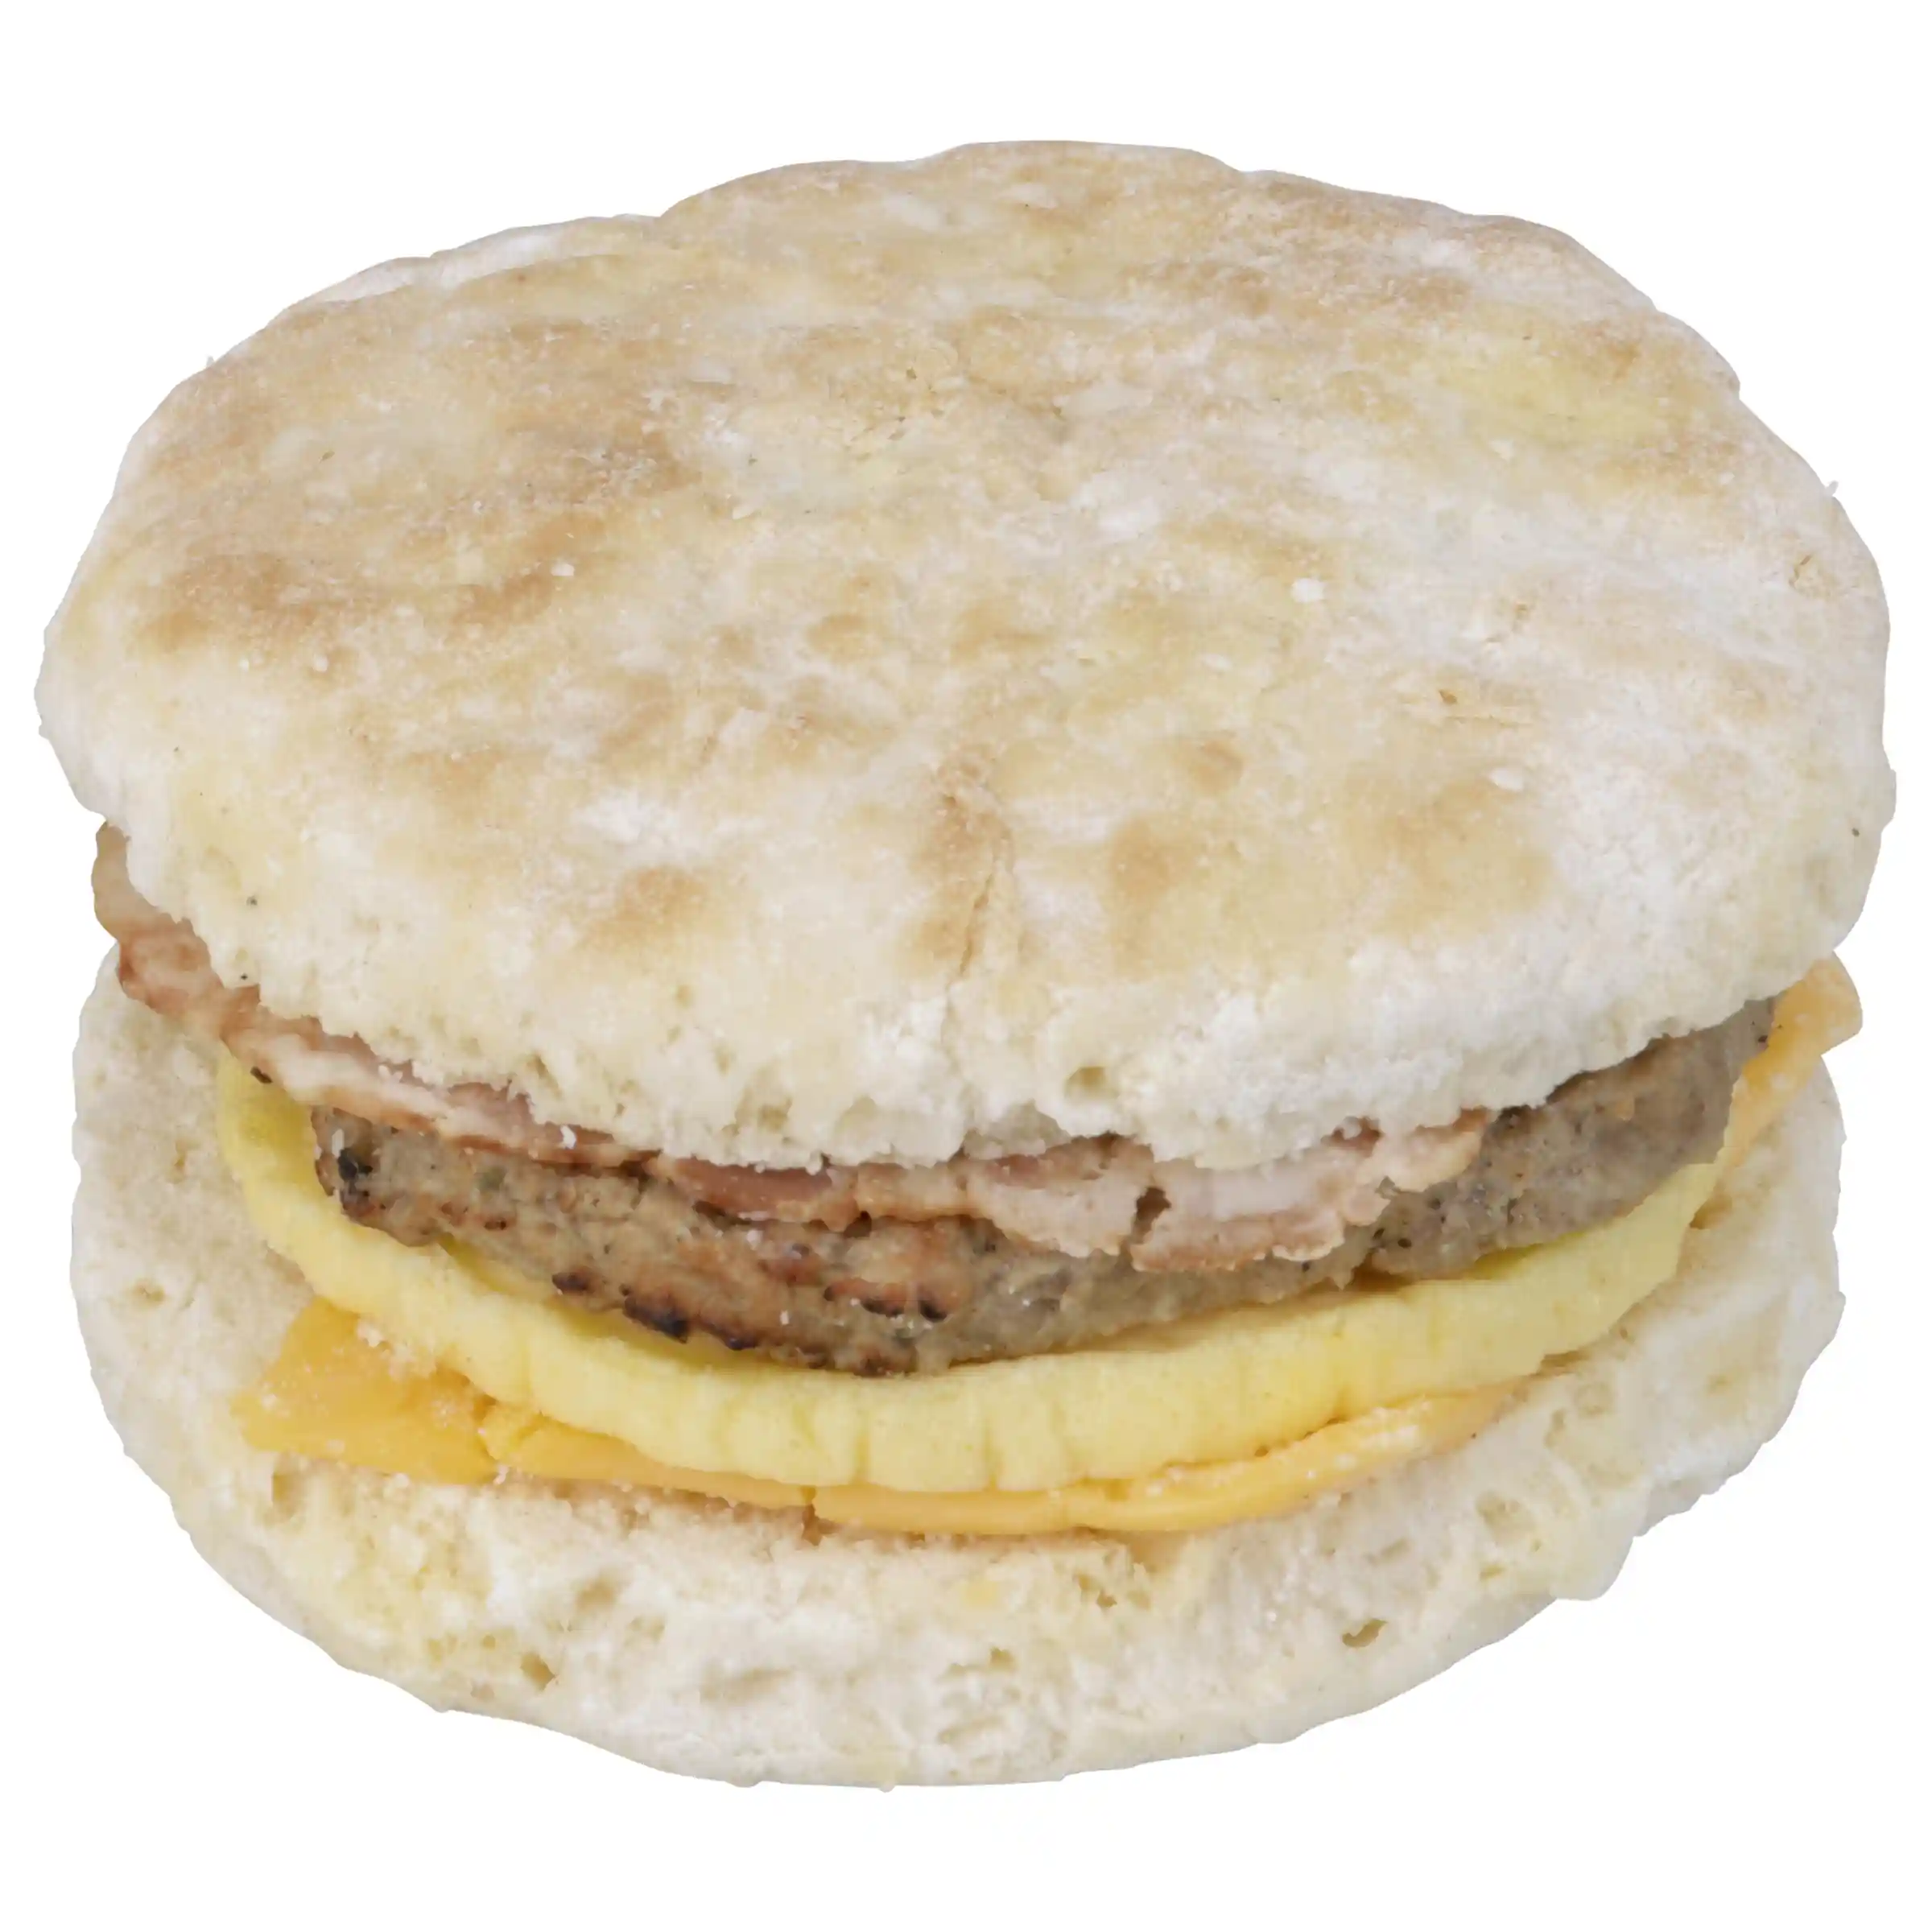 BIG AZ® Biscuit Stacker® Sausage, Bacon, Egg And Cheese Biscuit Sandwich_image_01